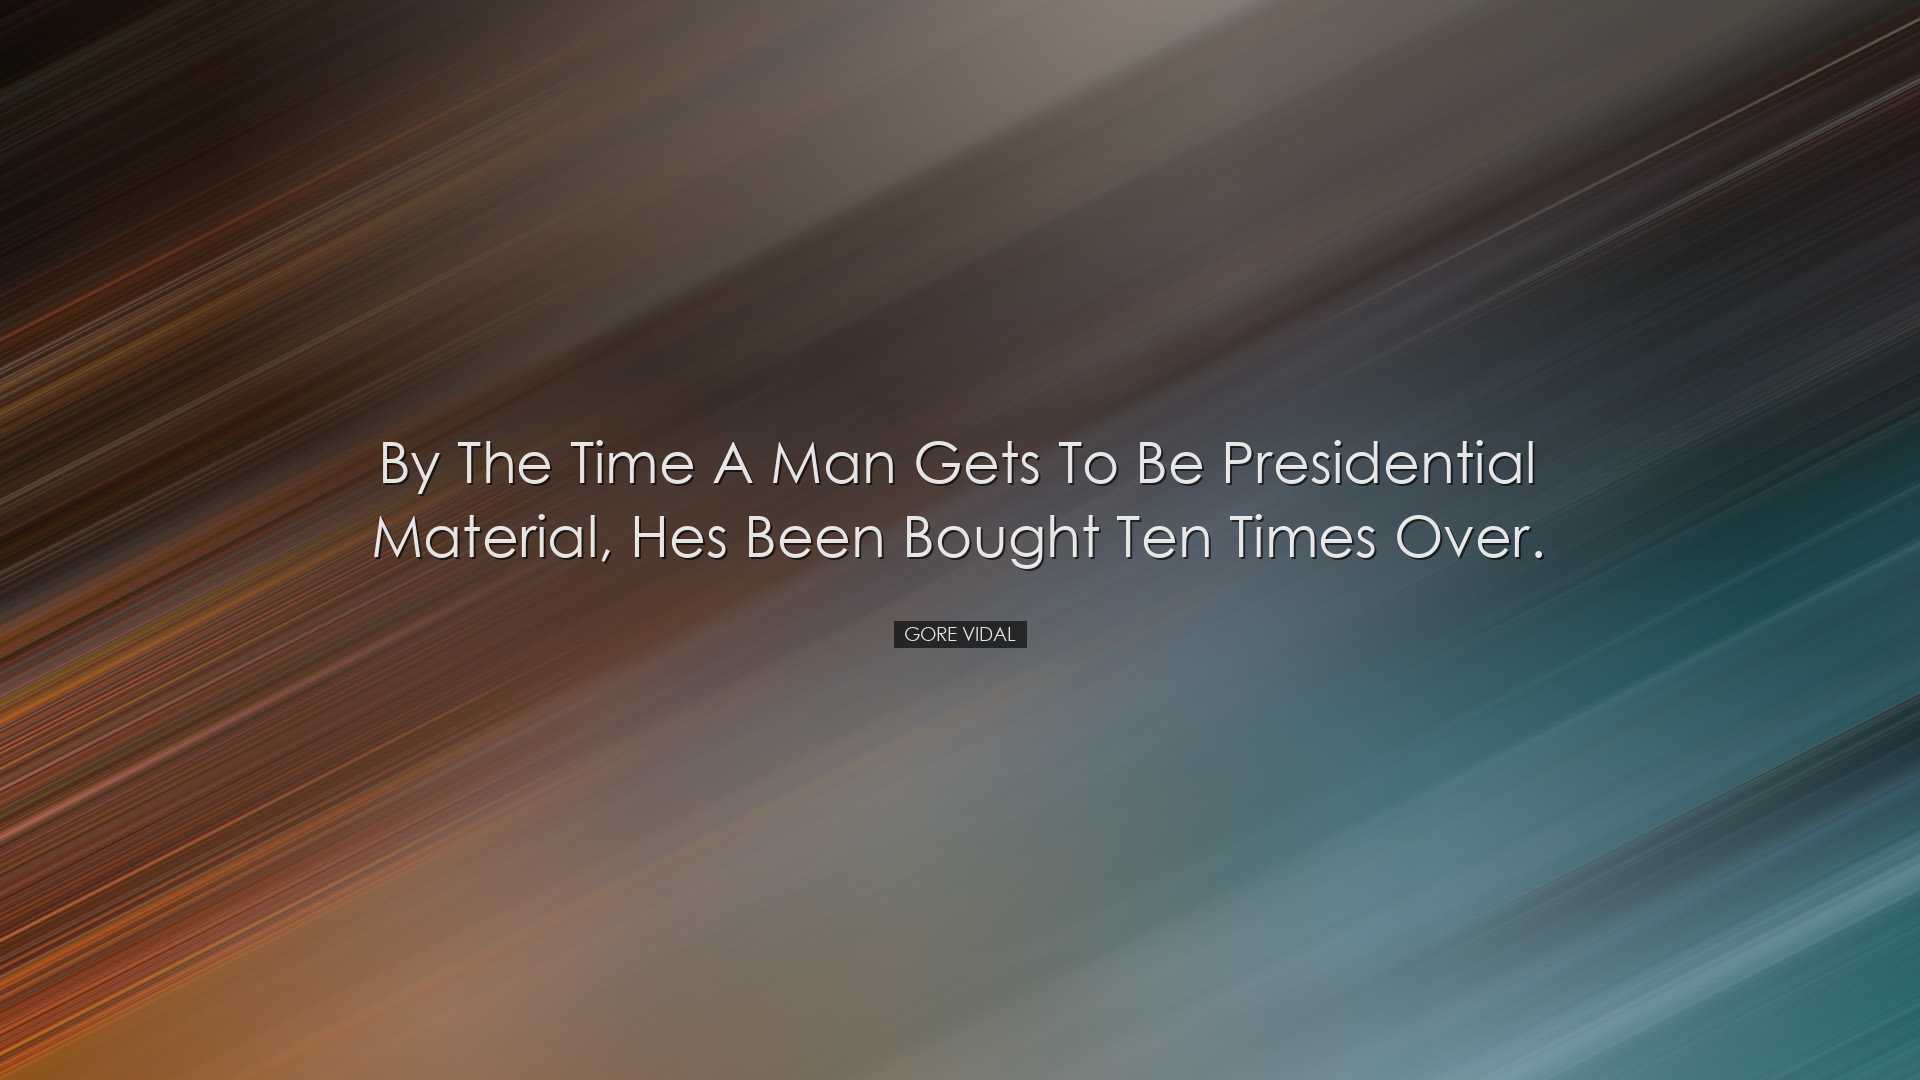 By the time a man gets to be presidential material, hes been bough